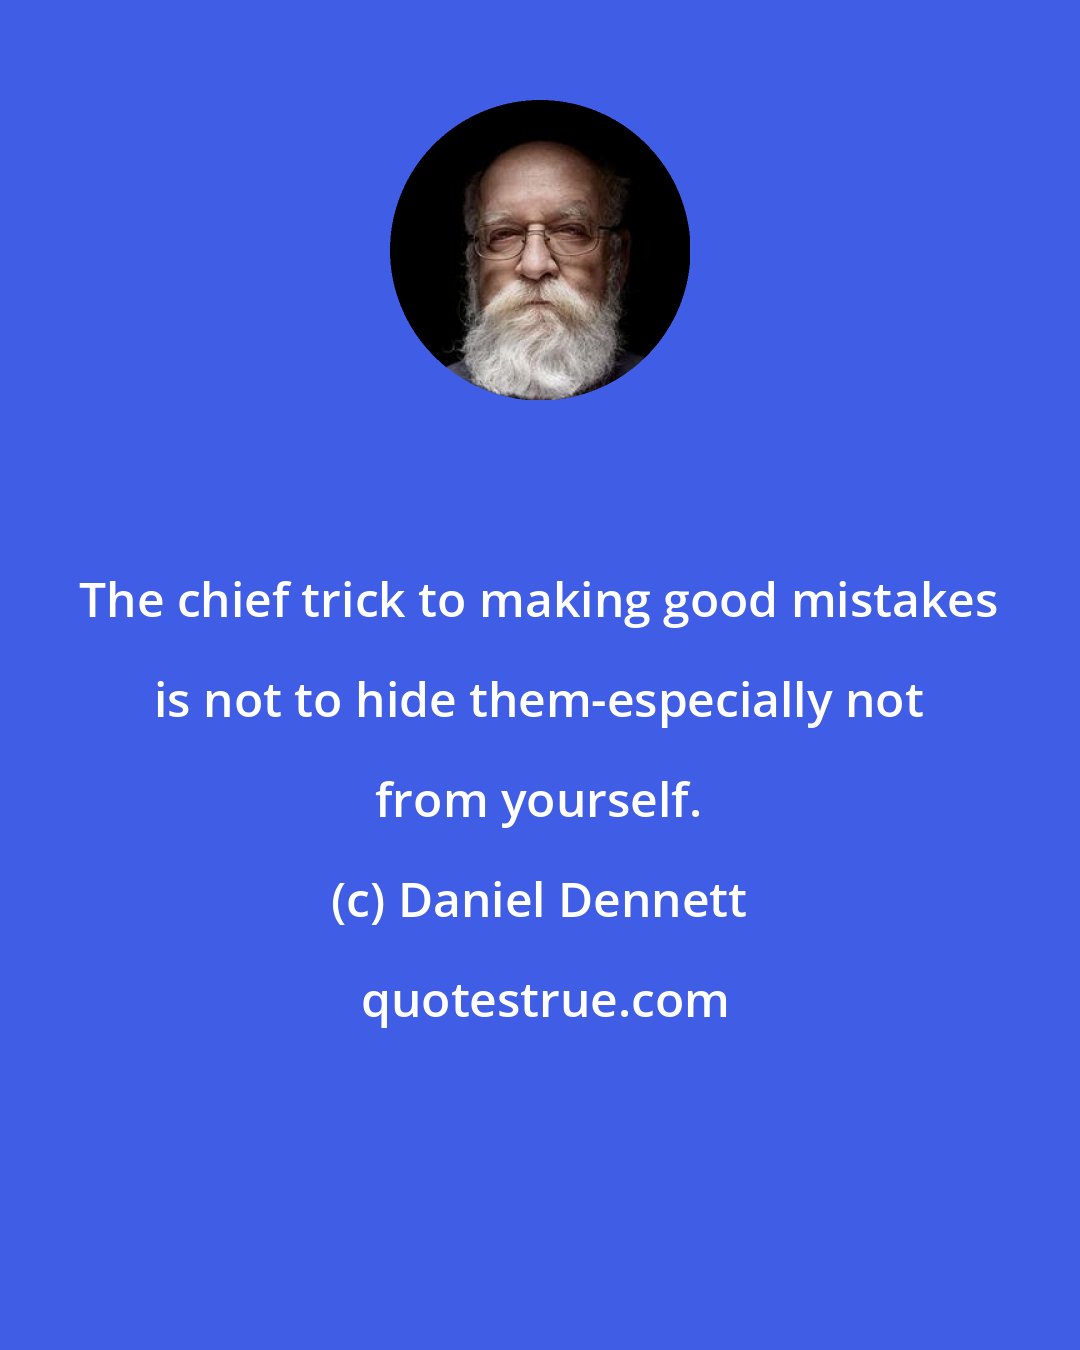 Daniel Dennett: The chief trick to making good mistakes is not to hide them-especially not from yourself.